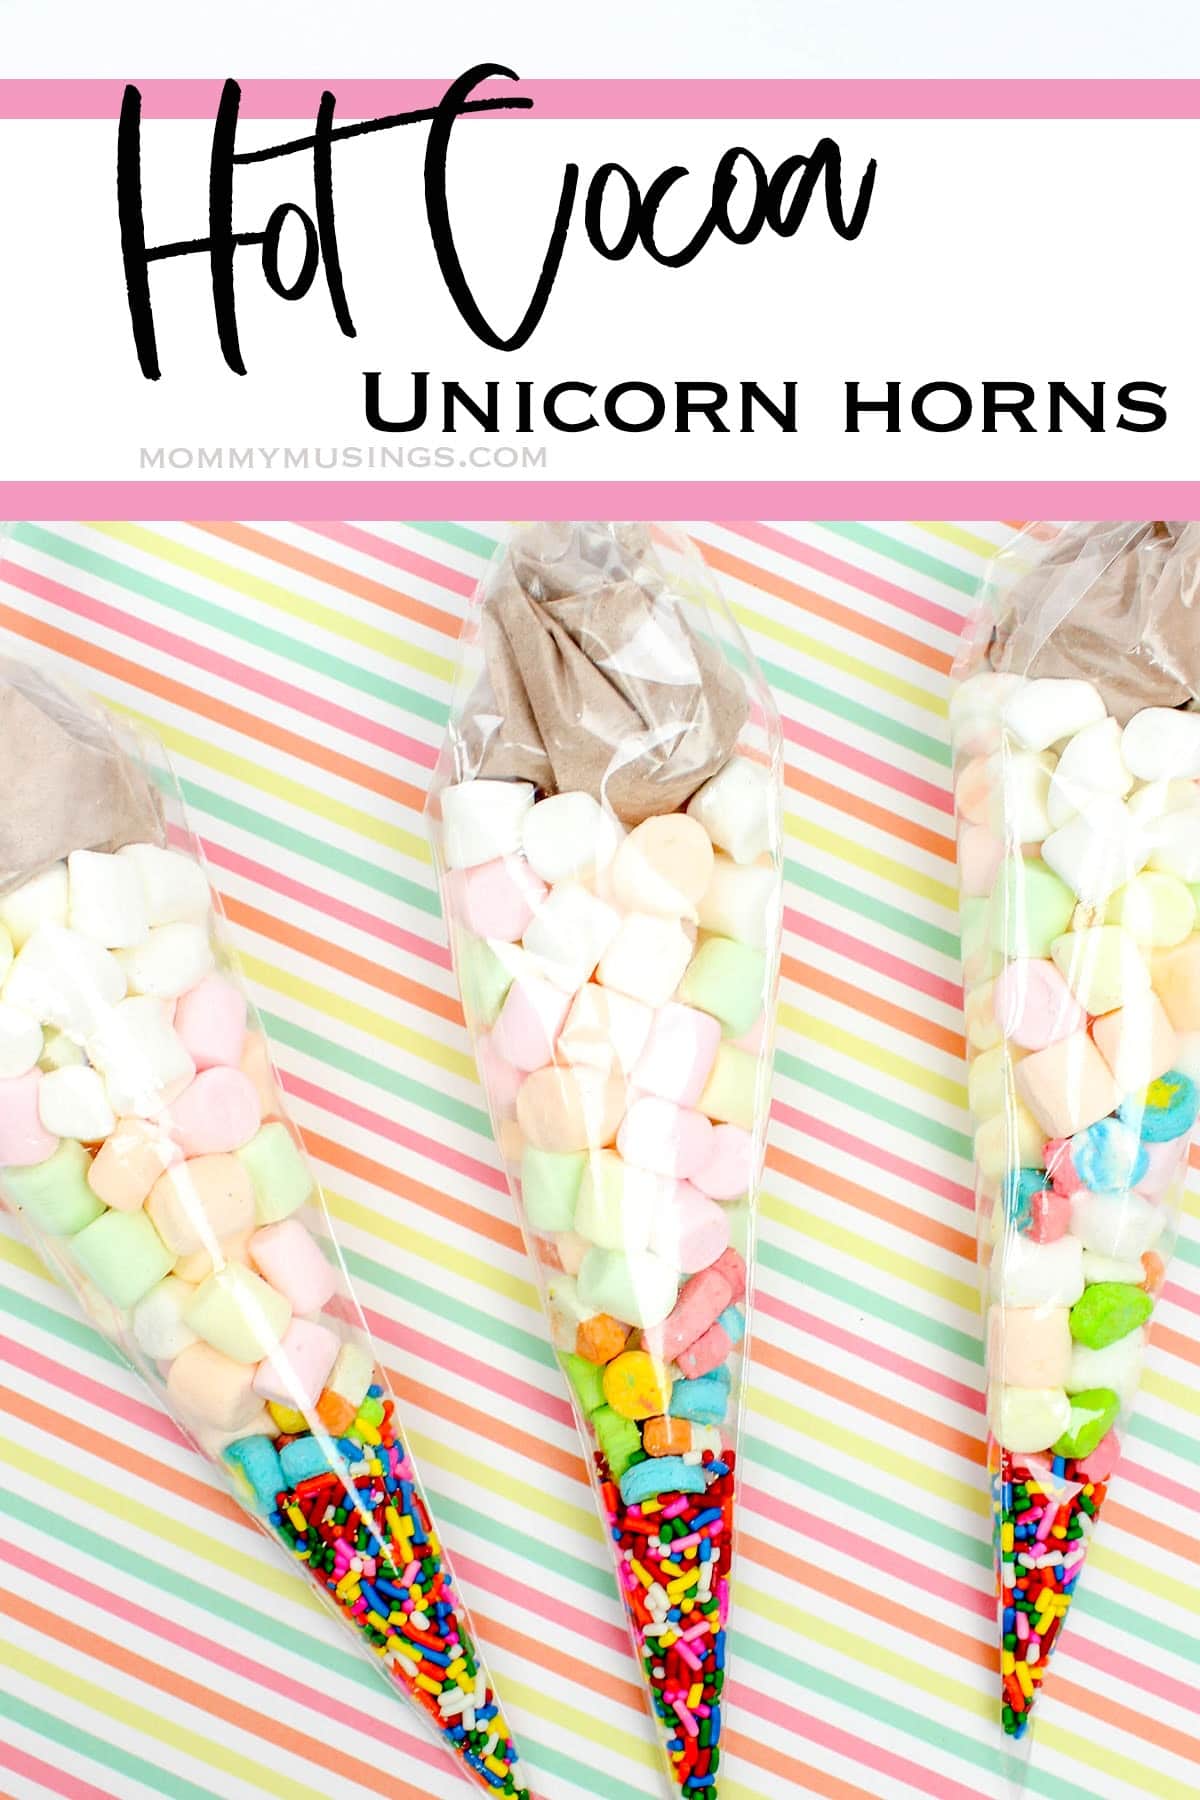 hot cocoa mix gift unicorn horns with text which reads hot cocoa unicorn horns